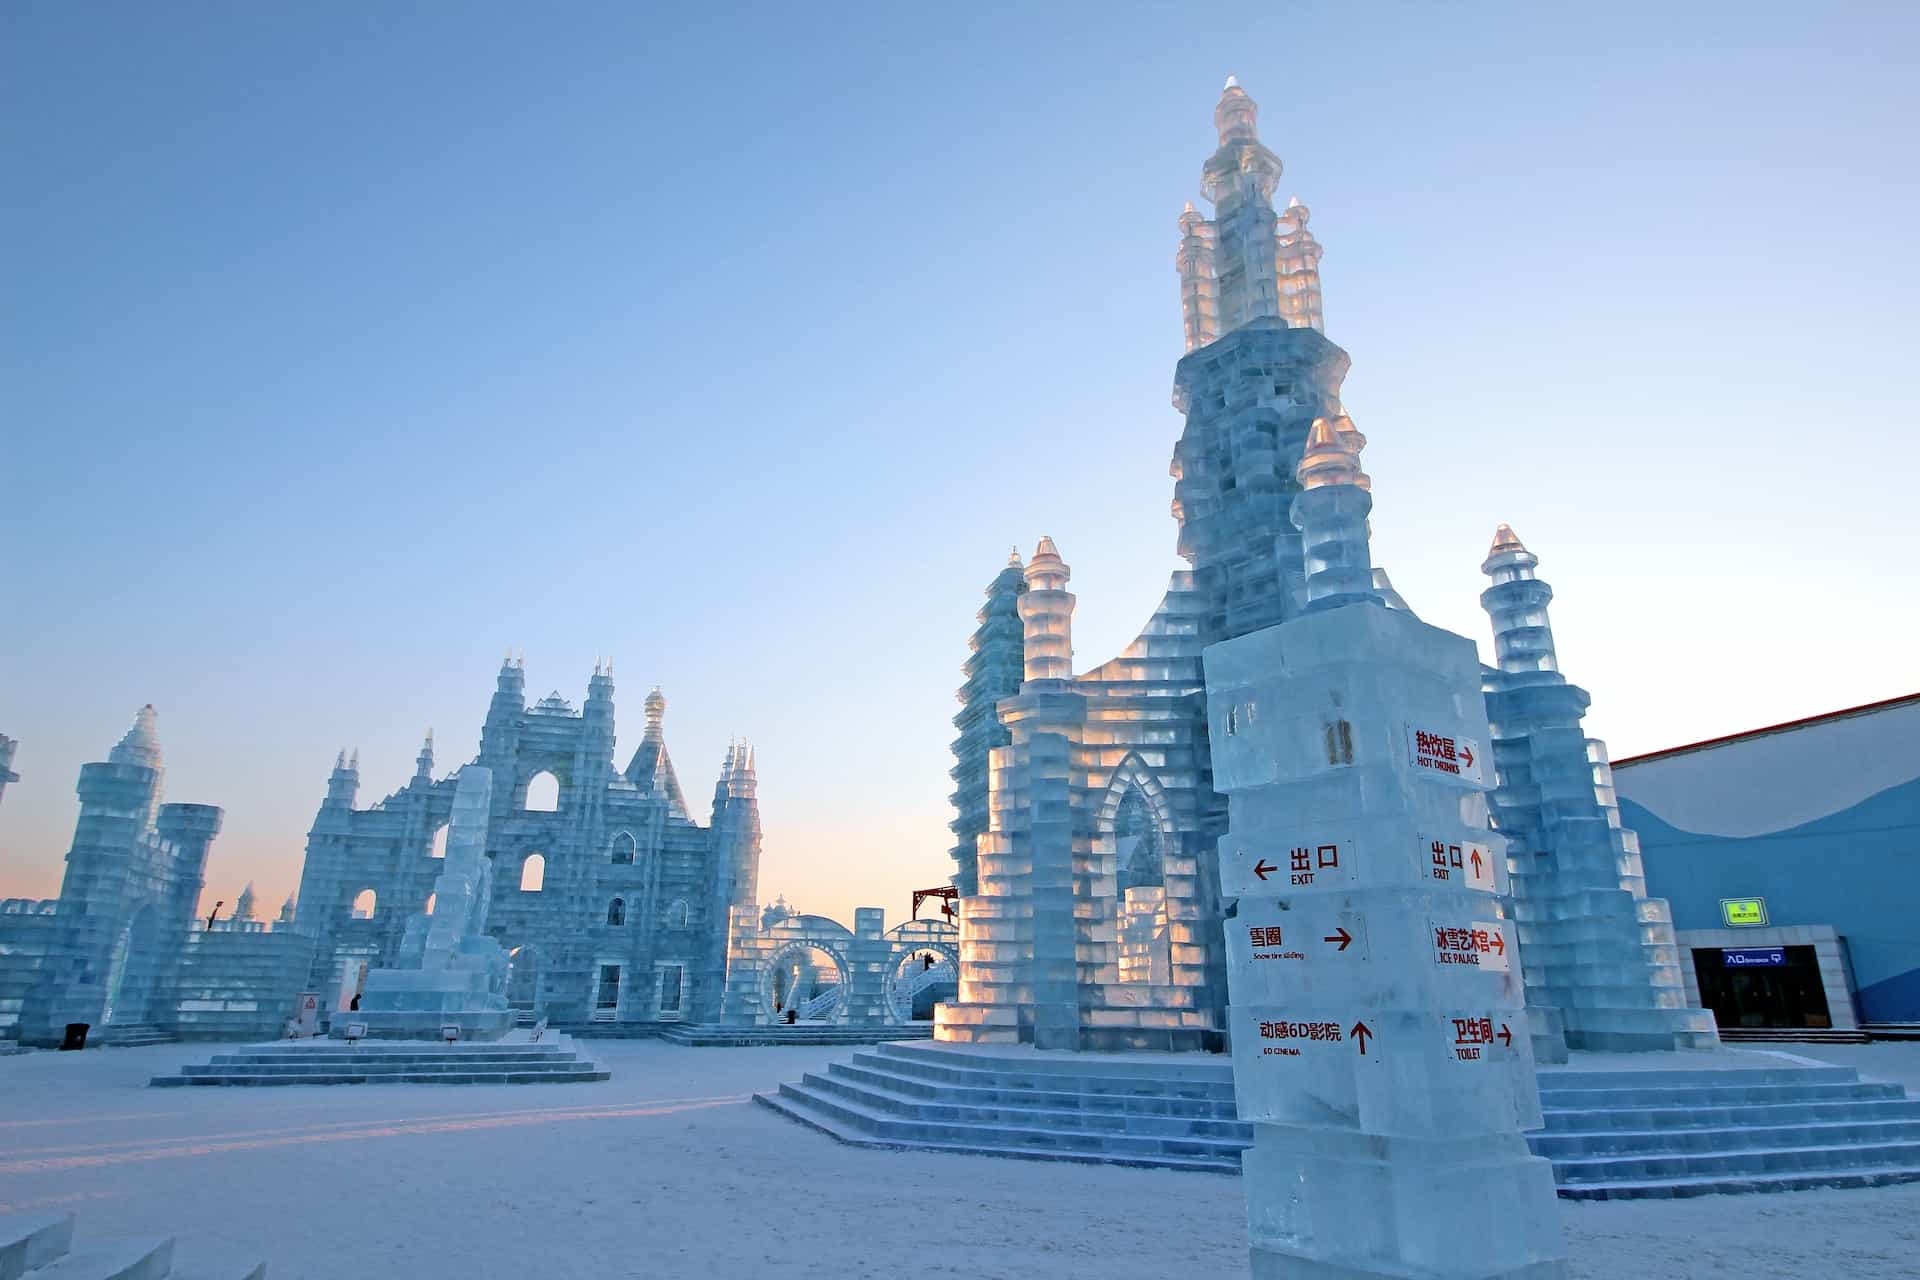 Ice sculptures in Harbin, China.